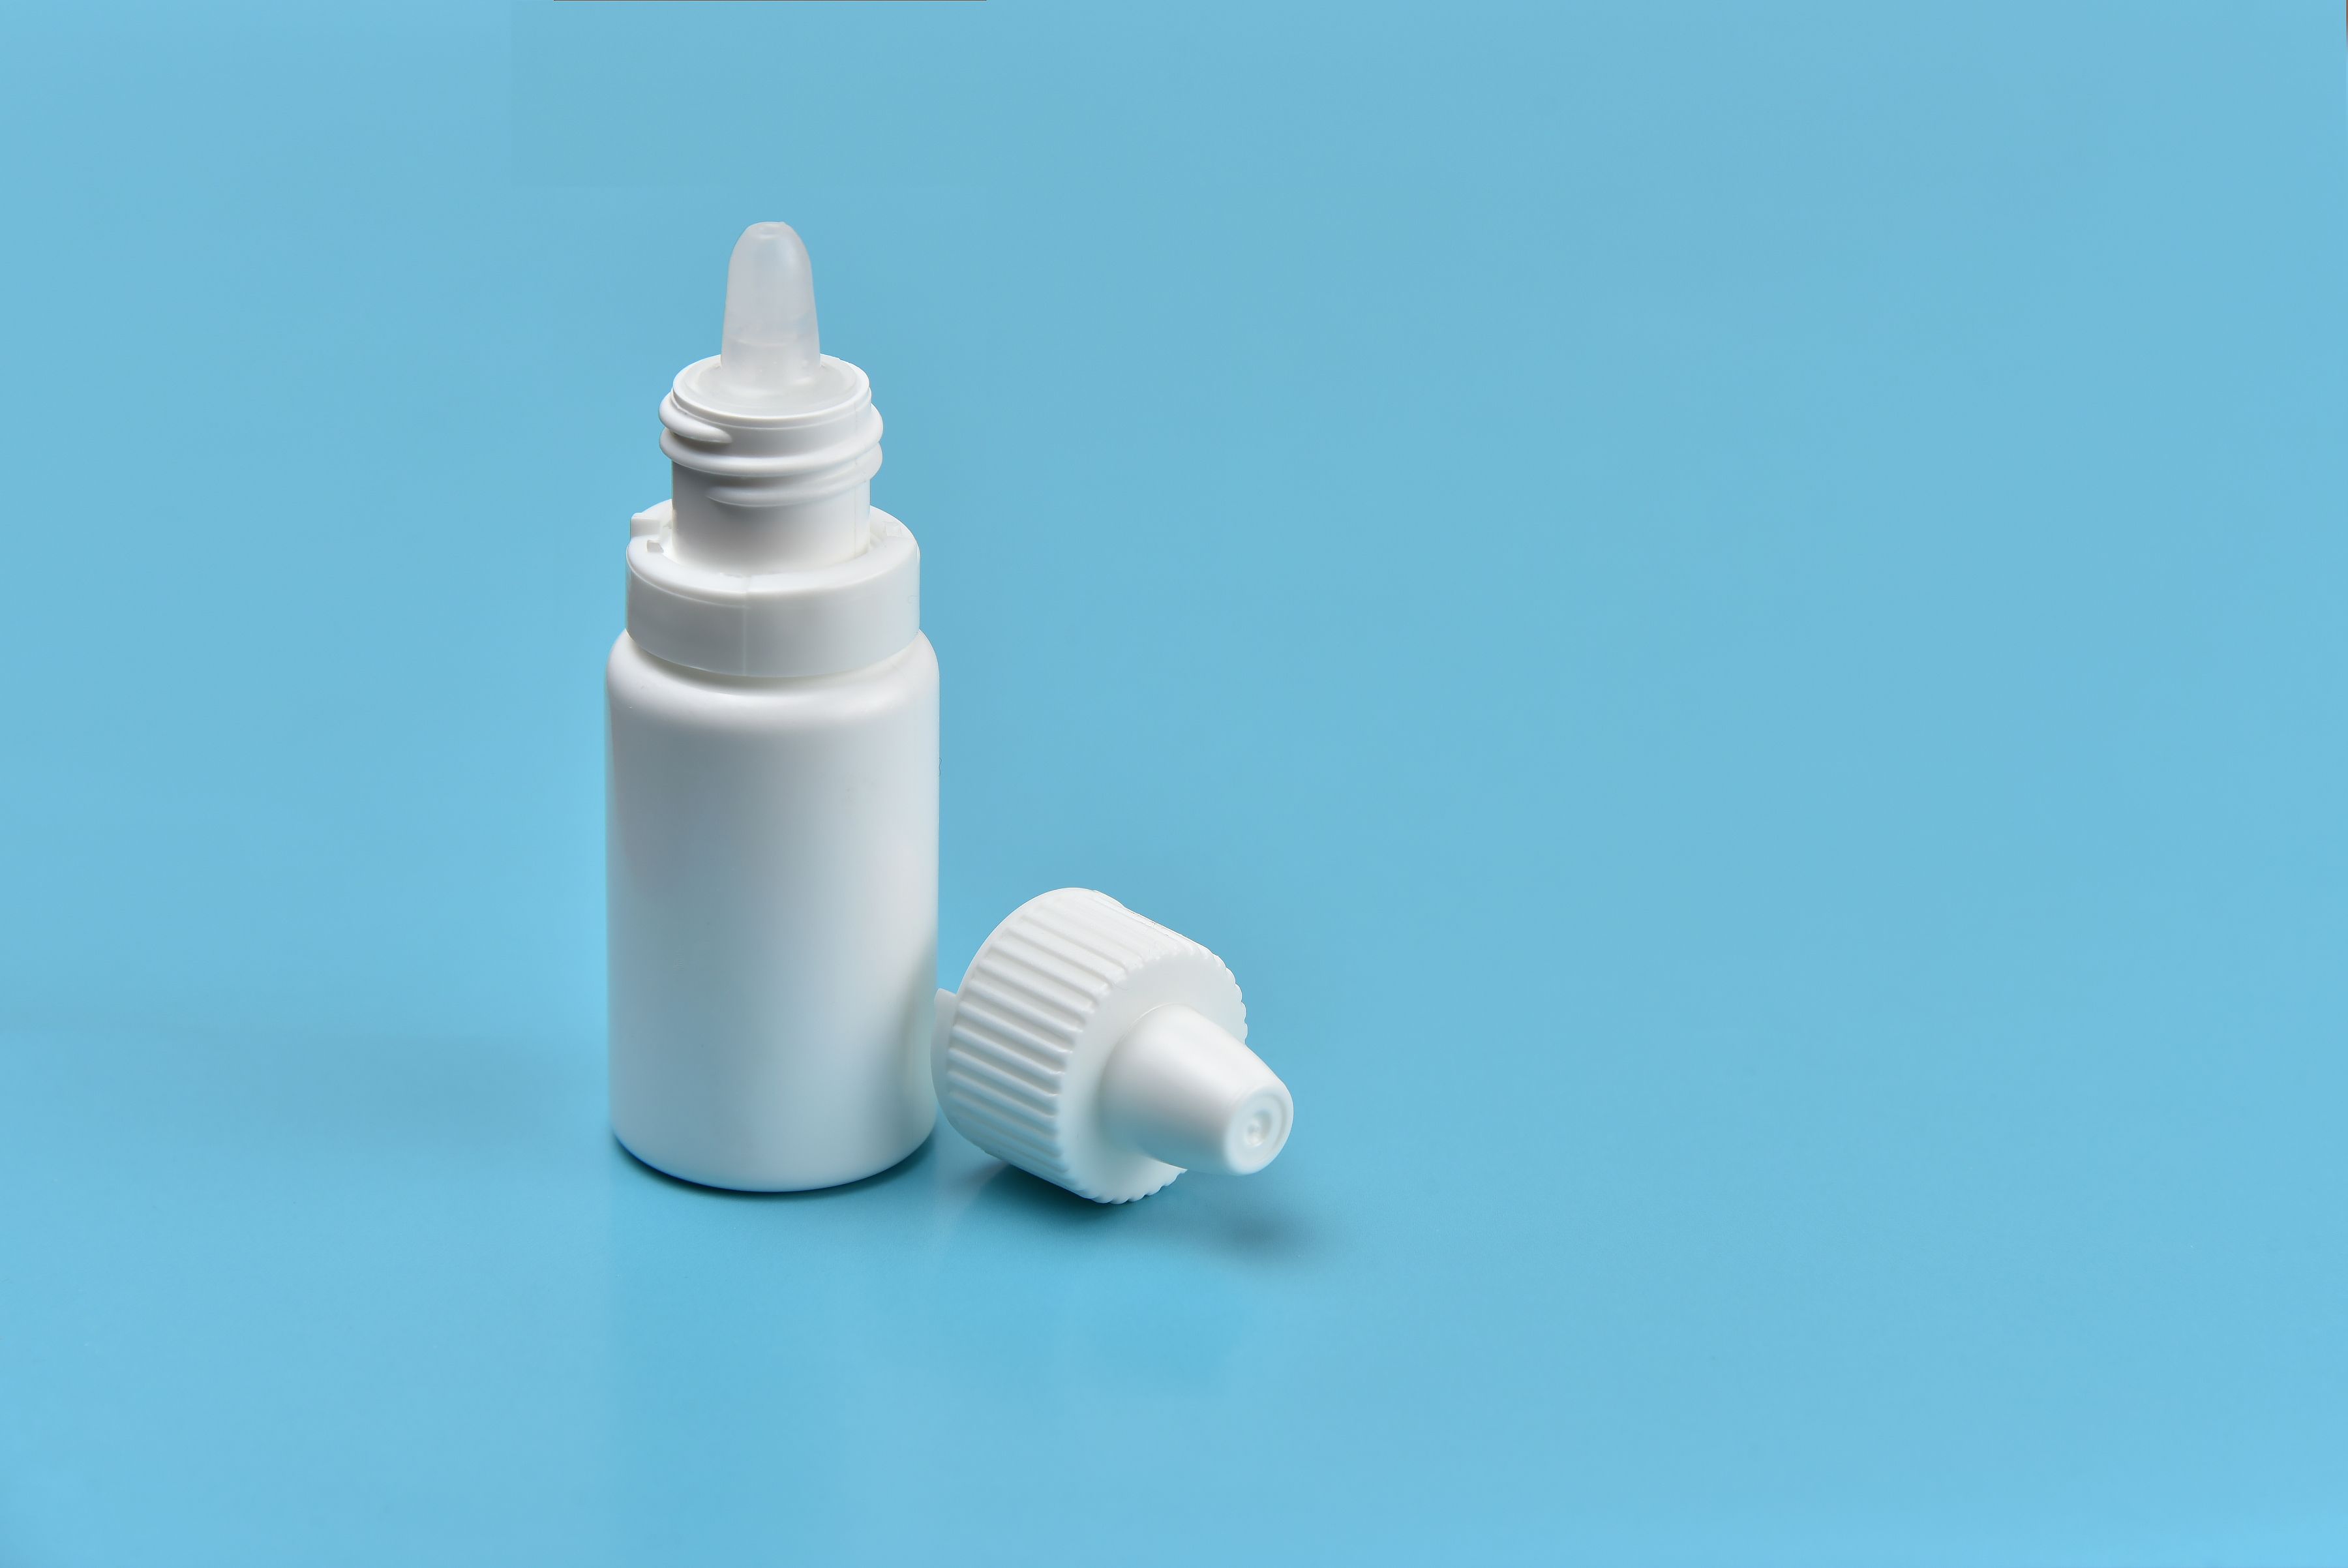 A Full List of Recalled Eye Drops Linked to Potential Bacterial